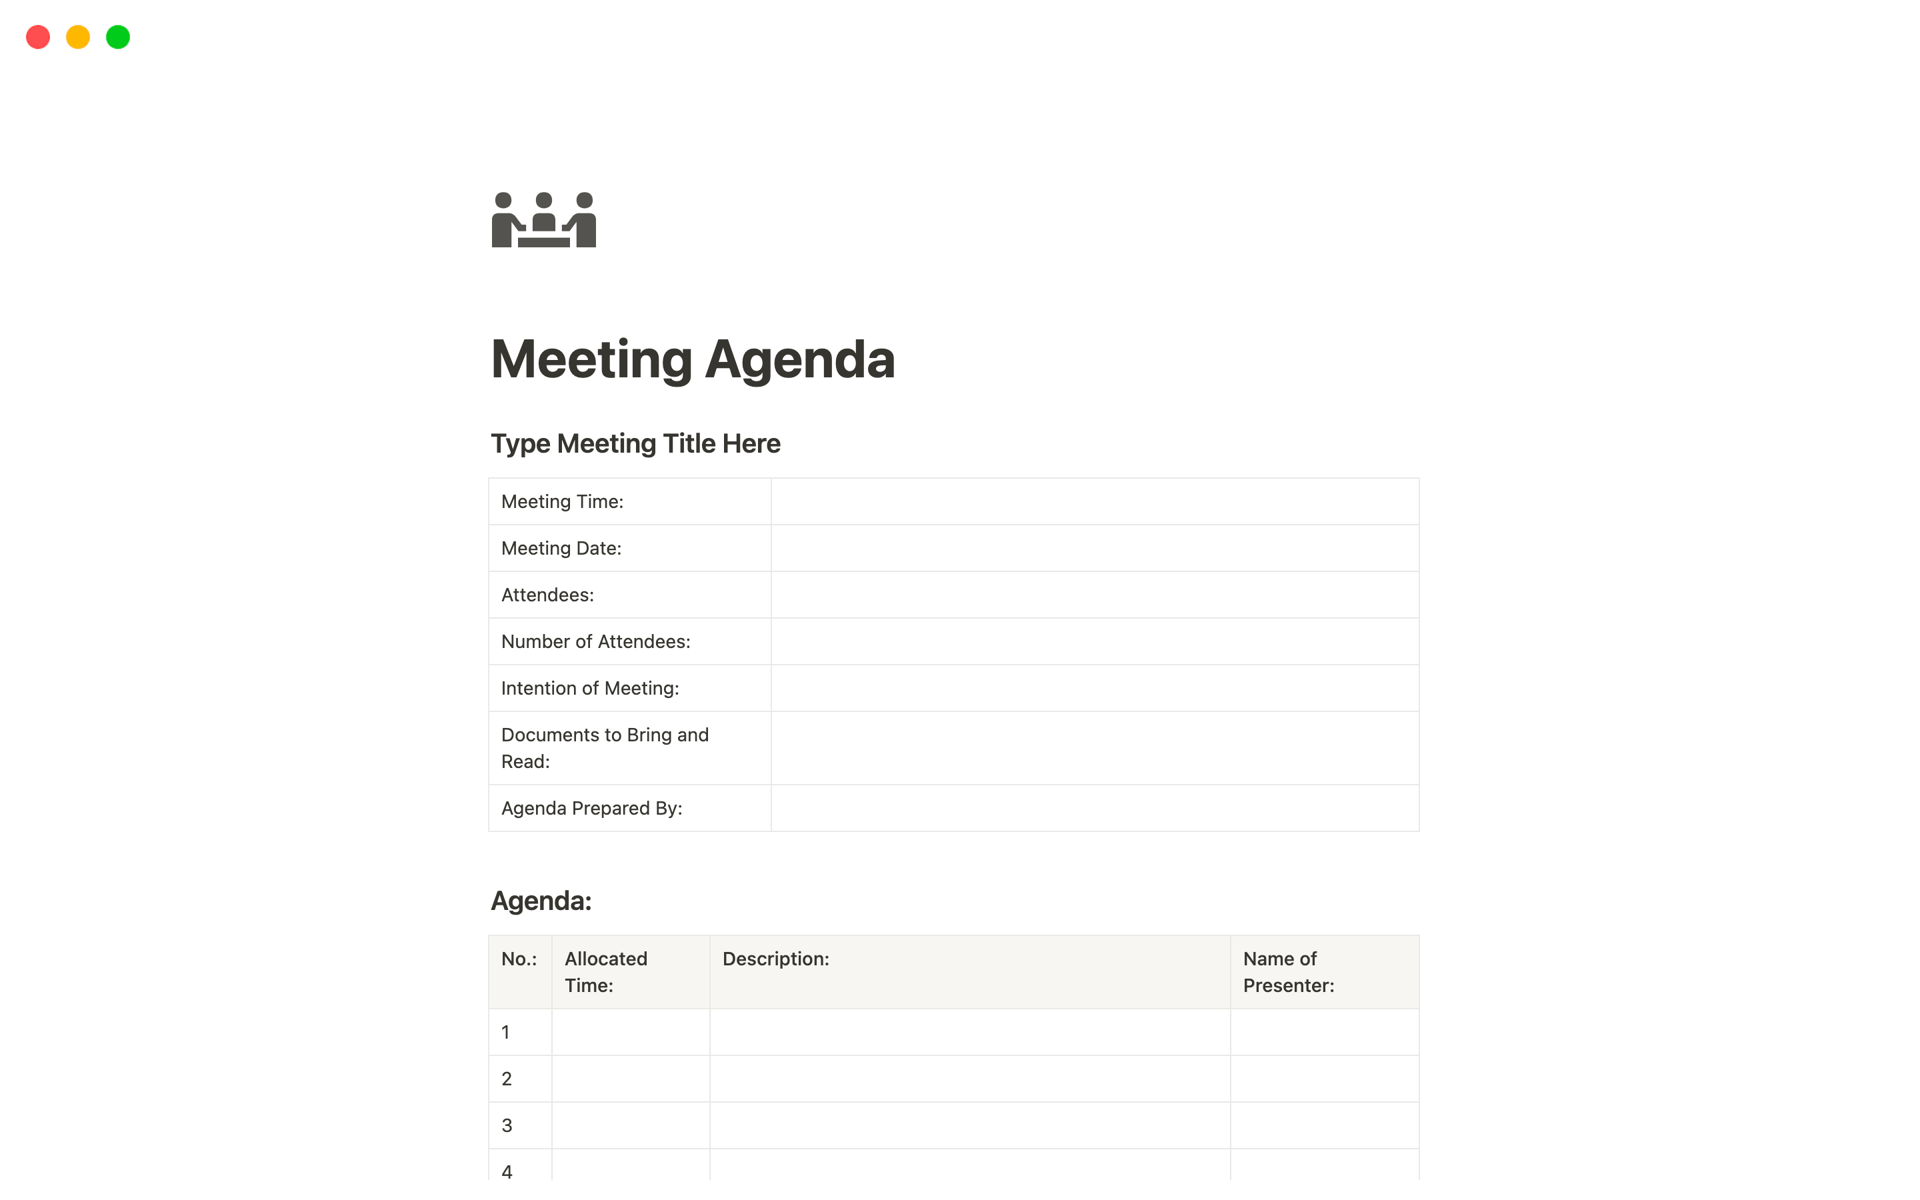 Create a simple meeting agenda in Notion.